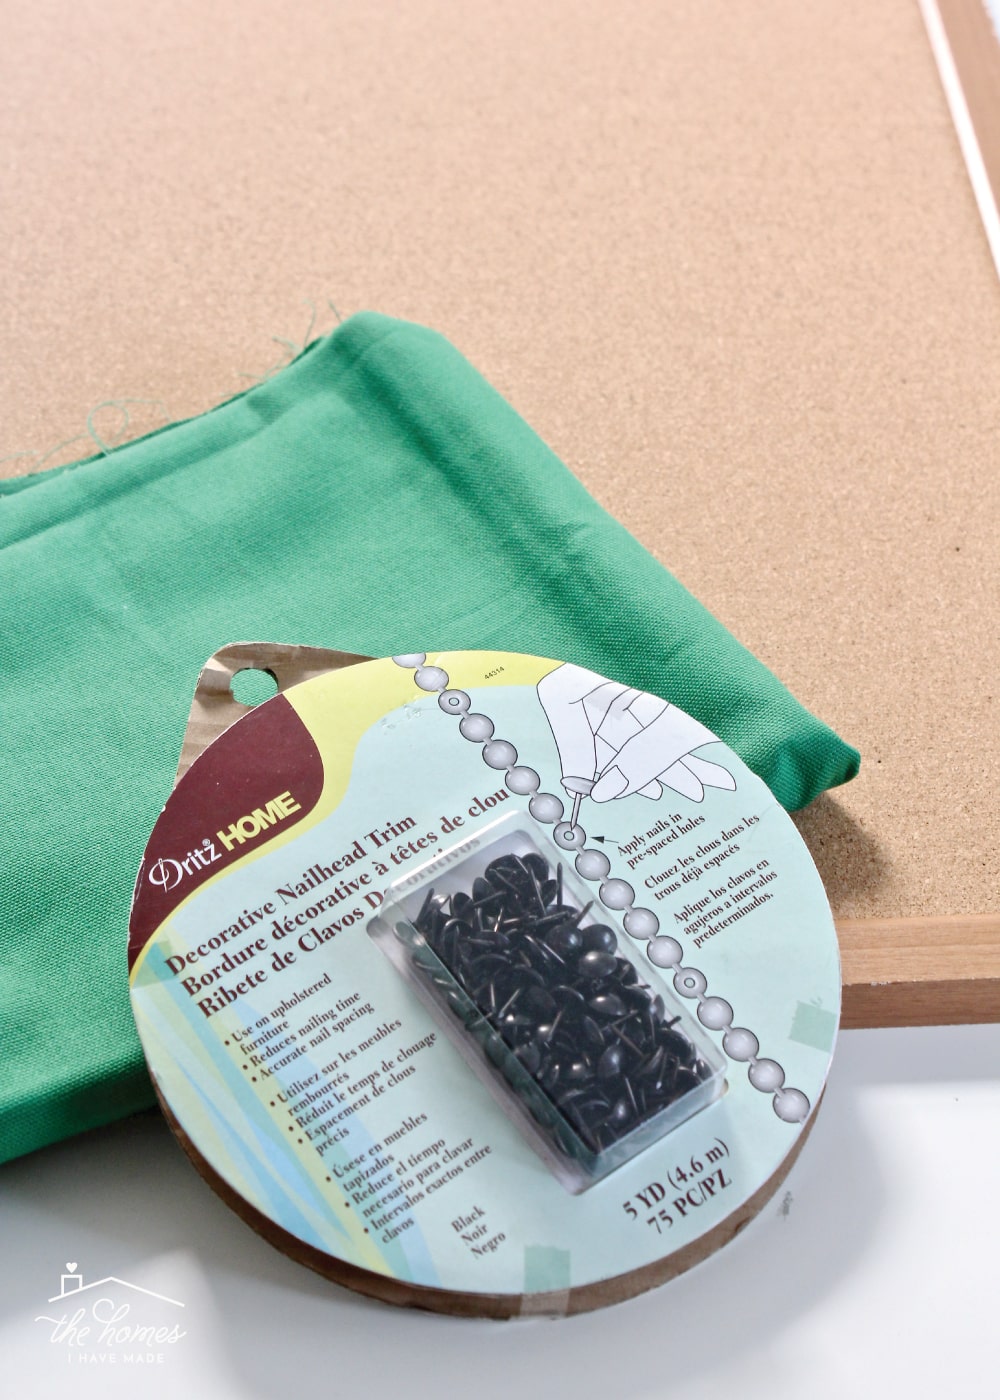 Give a basic bulletin board an easy, inexpensive and stylish upgrade with fabric and nailhead trim!